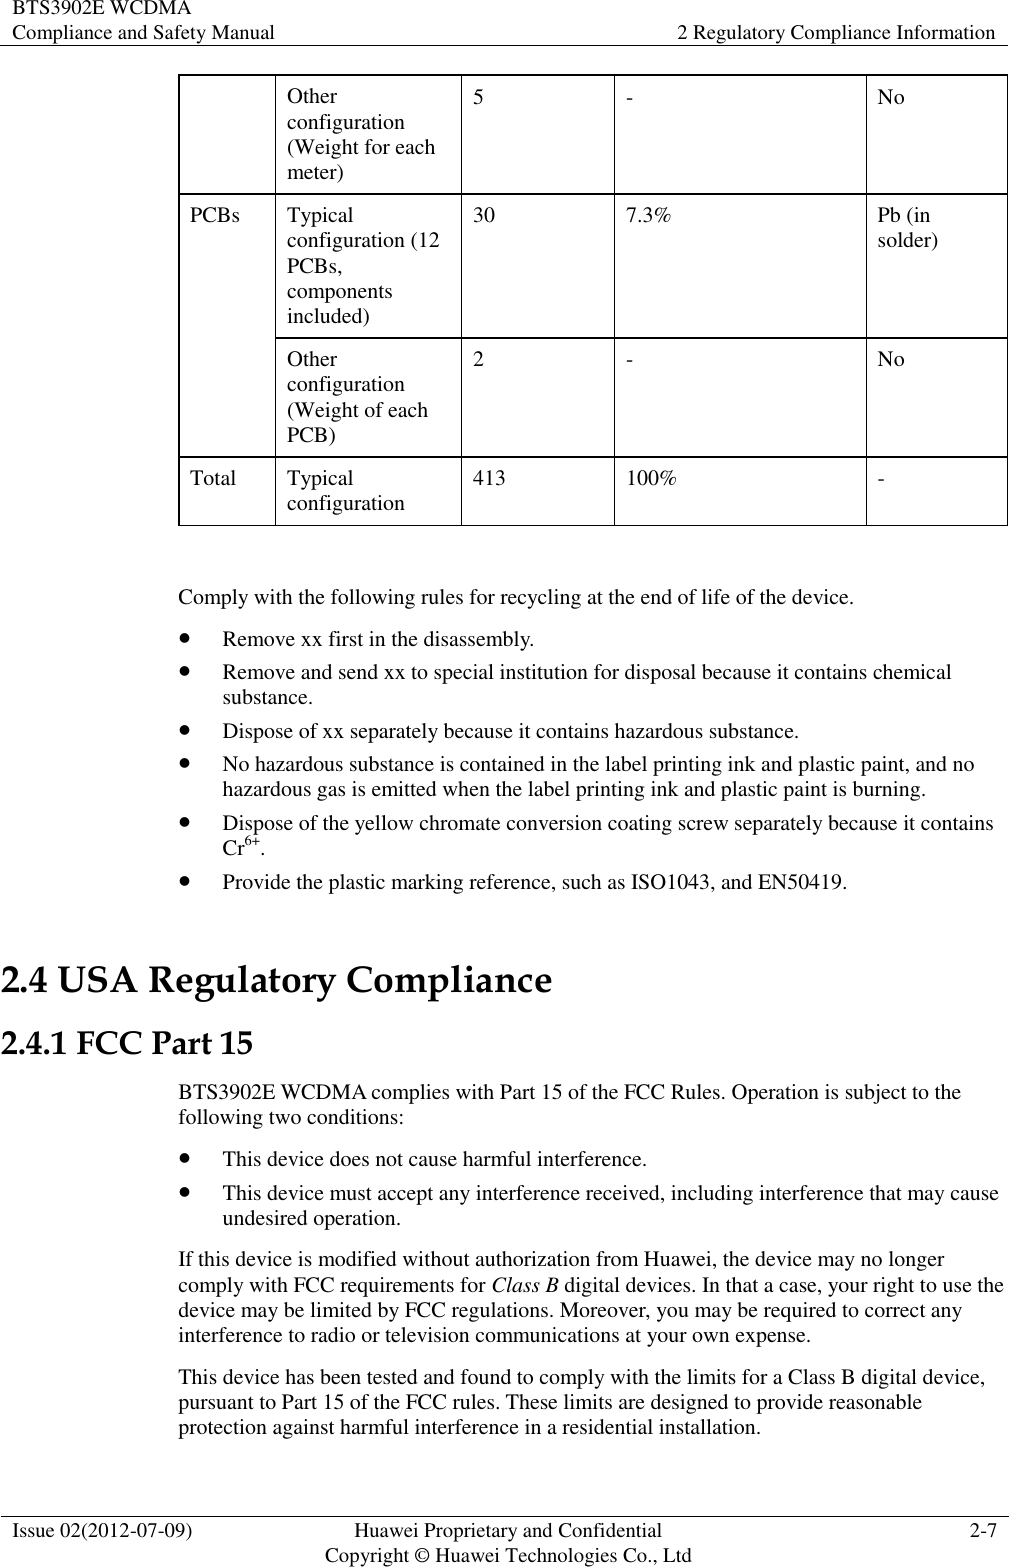 BTS3902E WCDMA Compliance and Safety Manual 2 Regulatory Compliance Information  Issue 02(2012-07-09) Huawei Proprietary and Confidential           Copyright © Huawei Technologies Co., Ltd 2-7  Other configuration (Weight for each meter) 5 - No PCBs Typical configuration (12 PCBs, components included) 30 7.3% Pb (in solder) Other configuration (Weight of each PCB) 2 - No Total Typical configuration 413 100% -  Comply with the following rules for recycling at the end of life of the device.  Remove xx first in the disassembly.  Remove and send xx to special institution for disposal because it contains chemical substance.  Dispose of xx separately because it contains hazardous substance.  No hazardous substance is contained in the label printing ink and plastic paint, and no hazardous gas is emitted when the label printing ink and plastic paint is burning.  Dispose of the yellow chromate conversion coating screw separately because it contains Cr6+.  Provide the plastic marking reference, such as ISO1043, and EN50419. 2.4 USA Regulatory Compliance 2.4.1 FCC Part 15 BTS3902E WCDMA complies with Part 15 of the FCC Rules. Operation is subject to the following two conditions:  This device does not cause harmful interference.  This device must accept any interference received, including interference that may cause undesired operation. If this device is modified without authorization from Huawei, the device may no longer comply with FCC requirements for Class B digital devices. In that a case, your right to use the device may be limited by FCC regulations. Moreover, you may be required to correct any interference to radio or television communications at your own expense. This device has been tested and found to comply with the limits for a Class B digital device, pursuant to Part 15 of the FCC rules. These limits are designed to provide reasonable protection against harmful interference in a residential installation. 